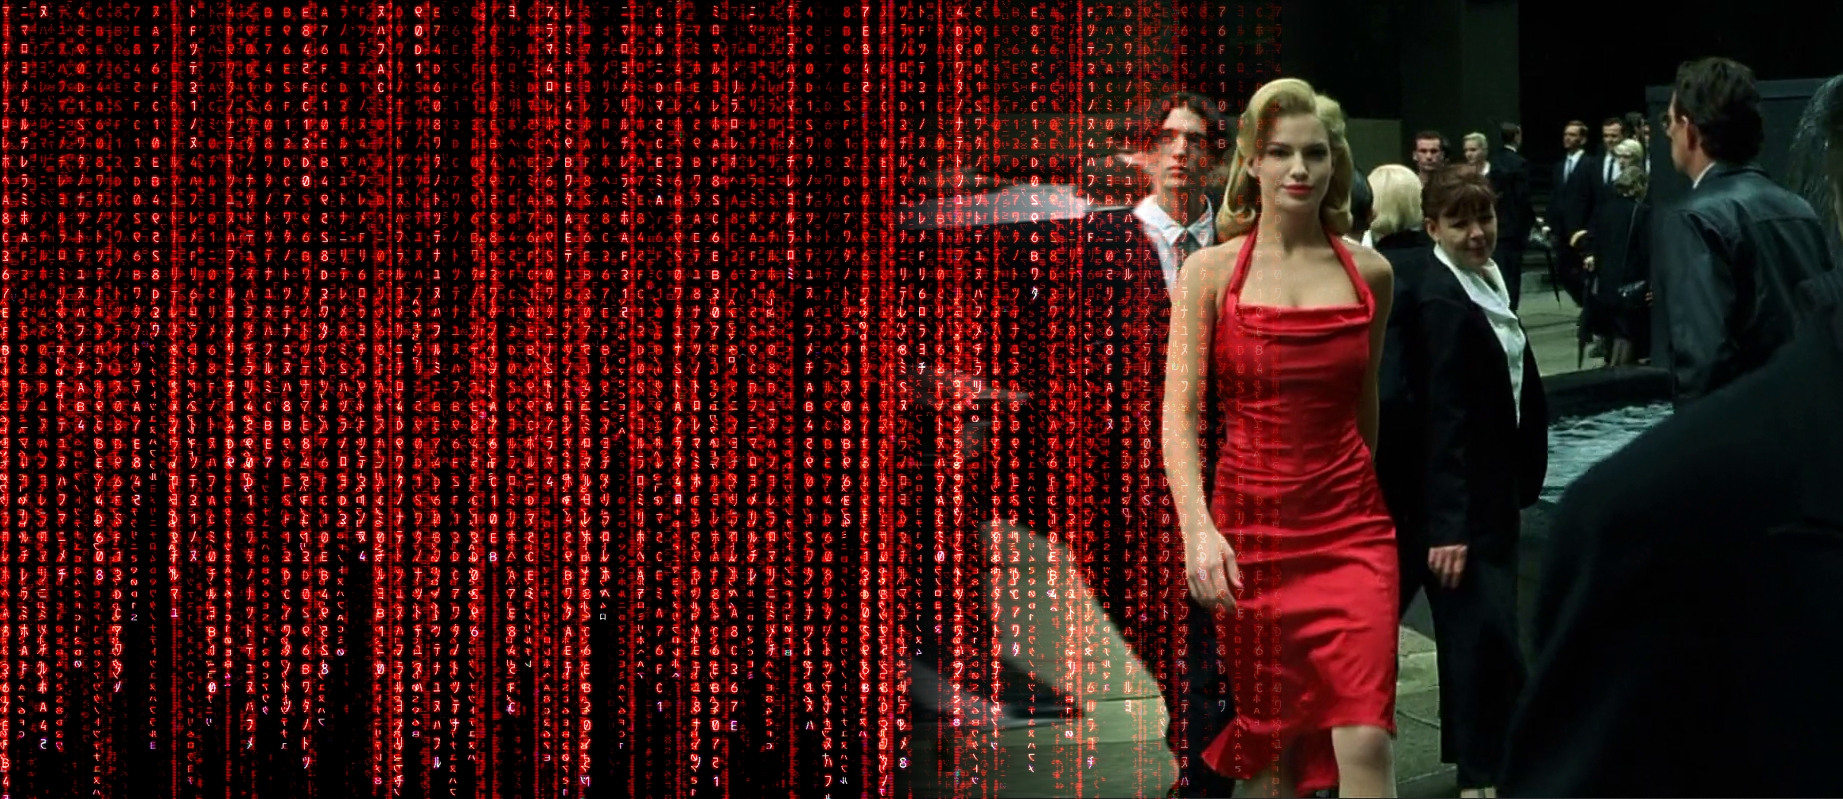 matrix-code-reality-lady-in-red.jpg